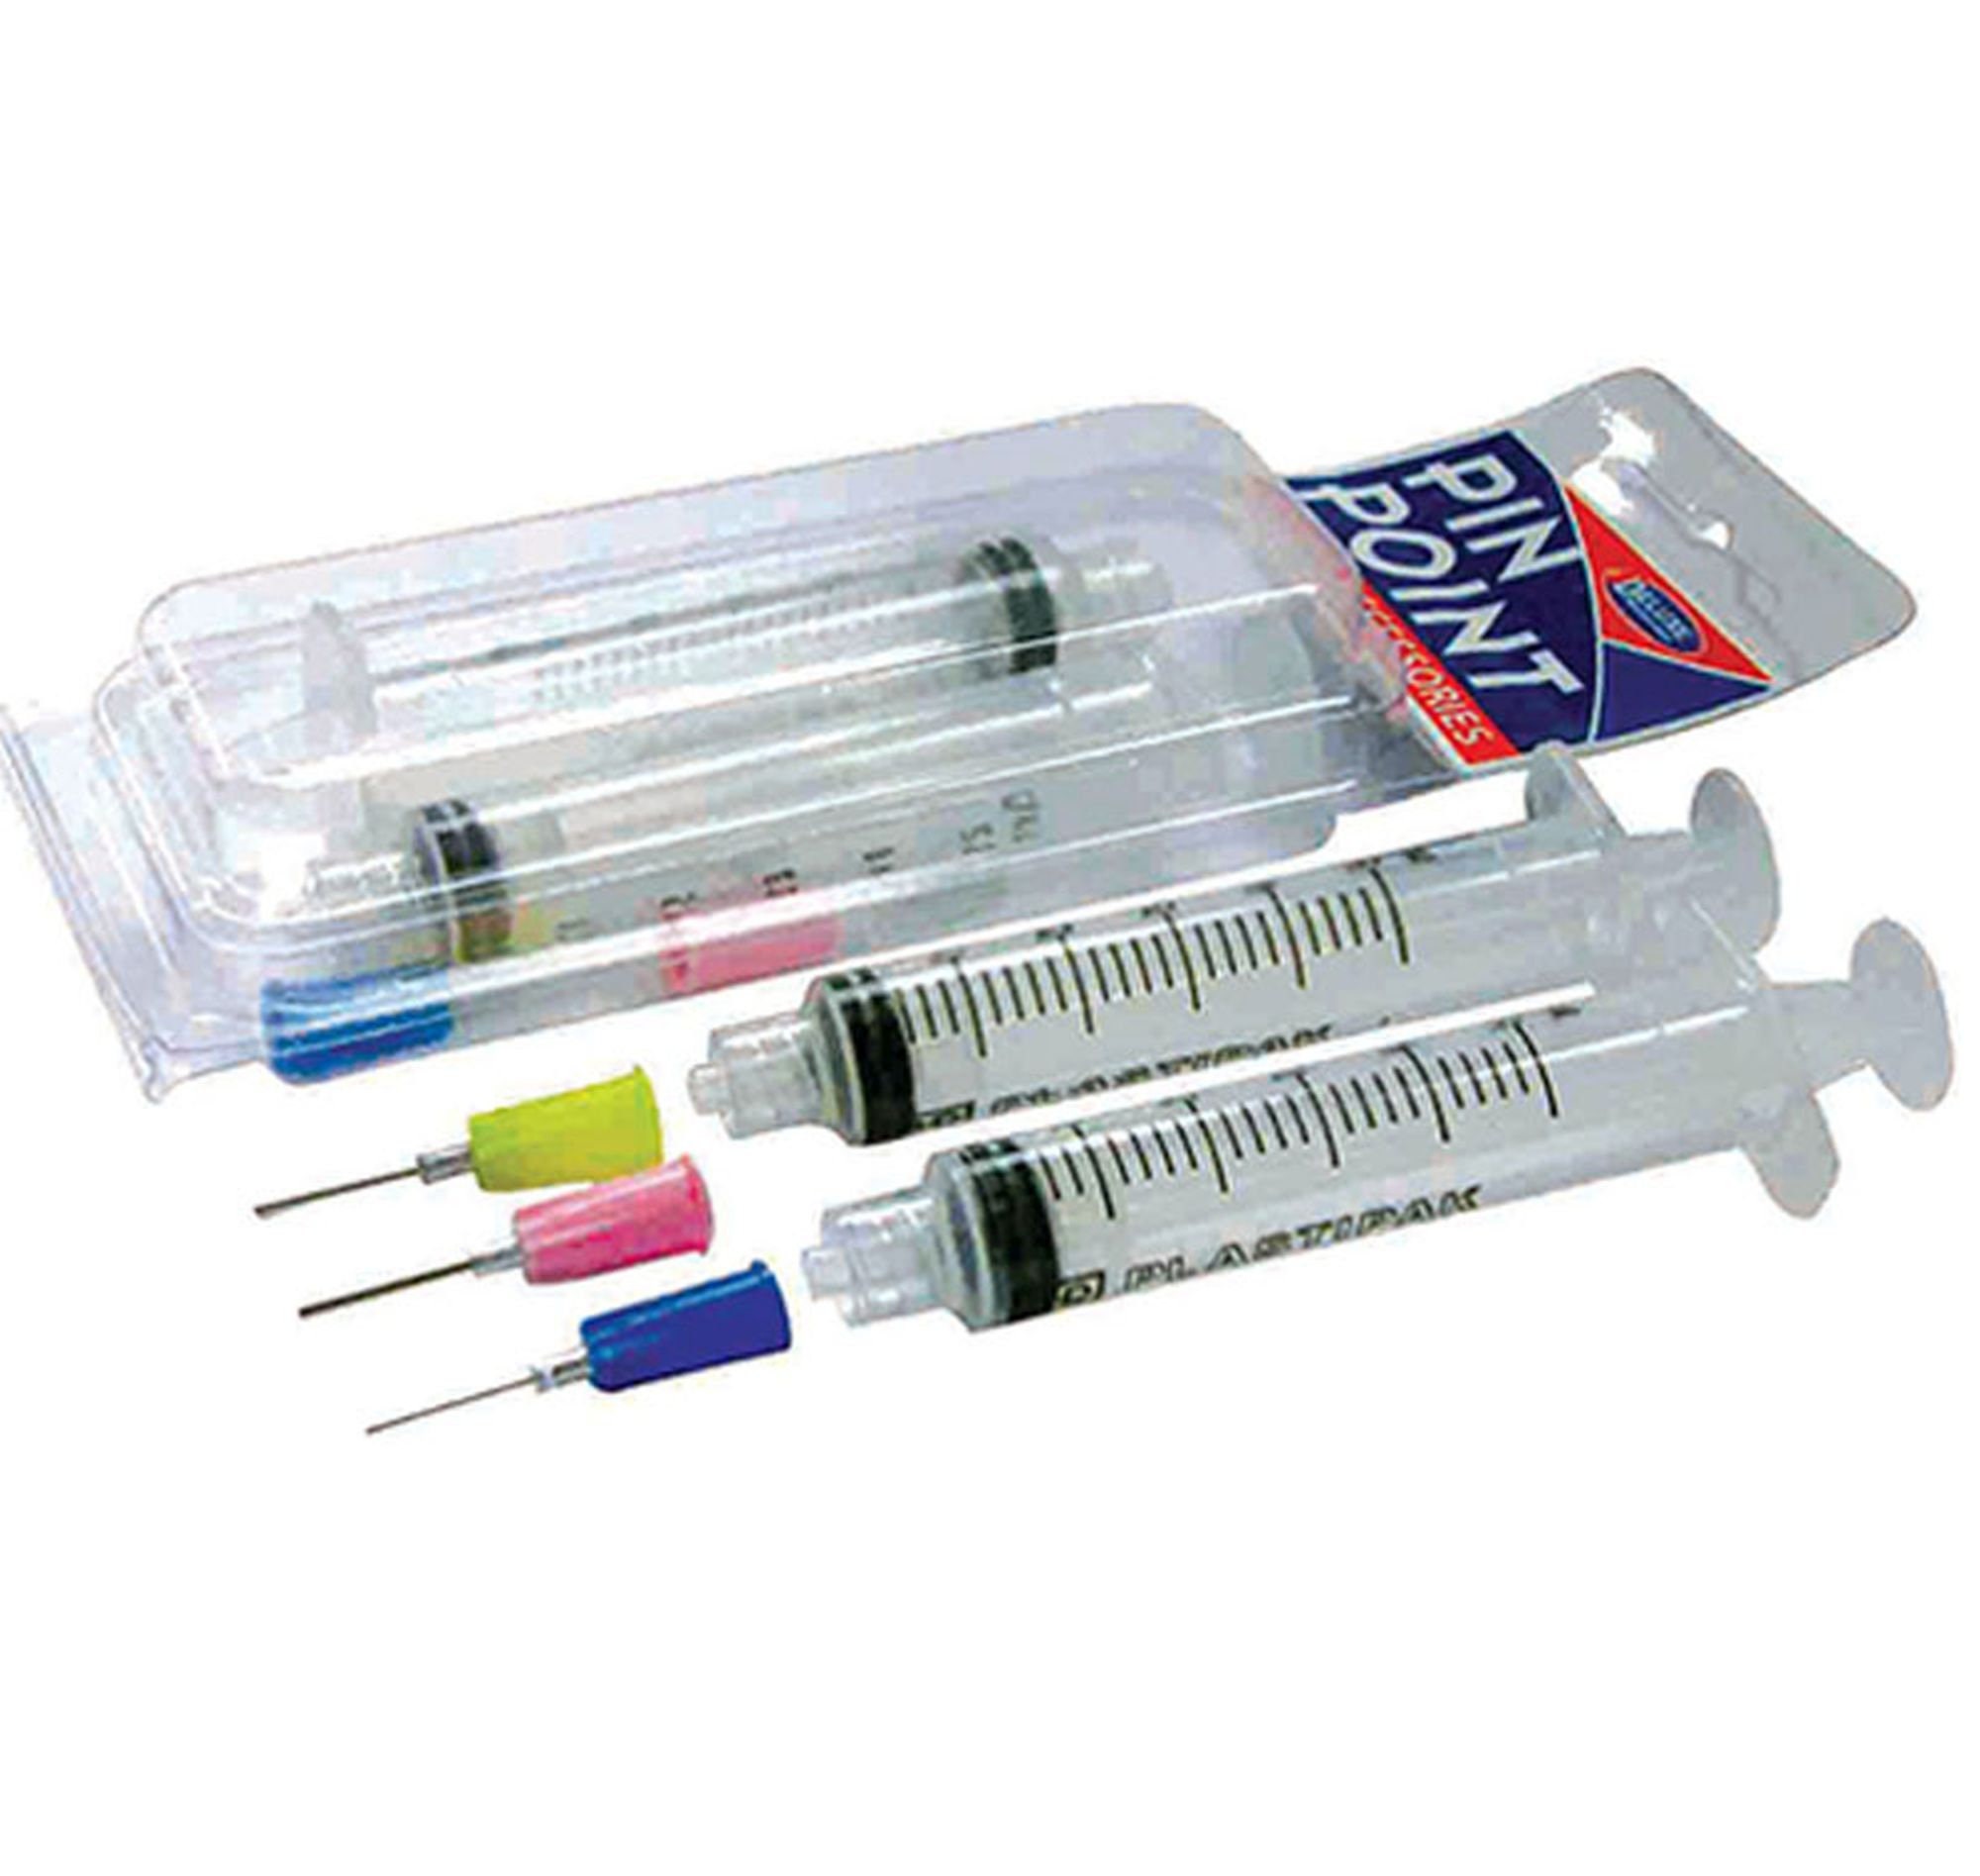 The BeadSmith CrystalFX Glue Syringes with Tips for Gem-Tac (4 pack)